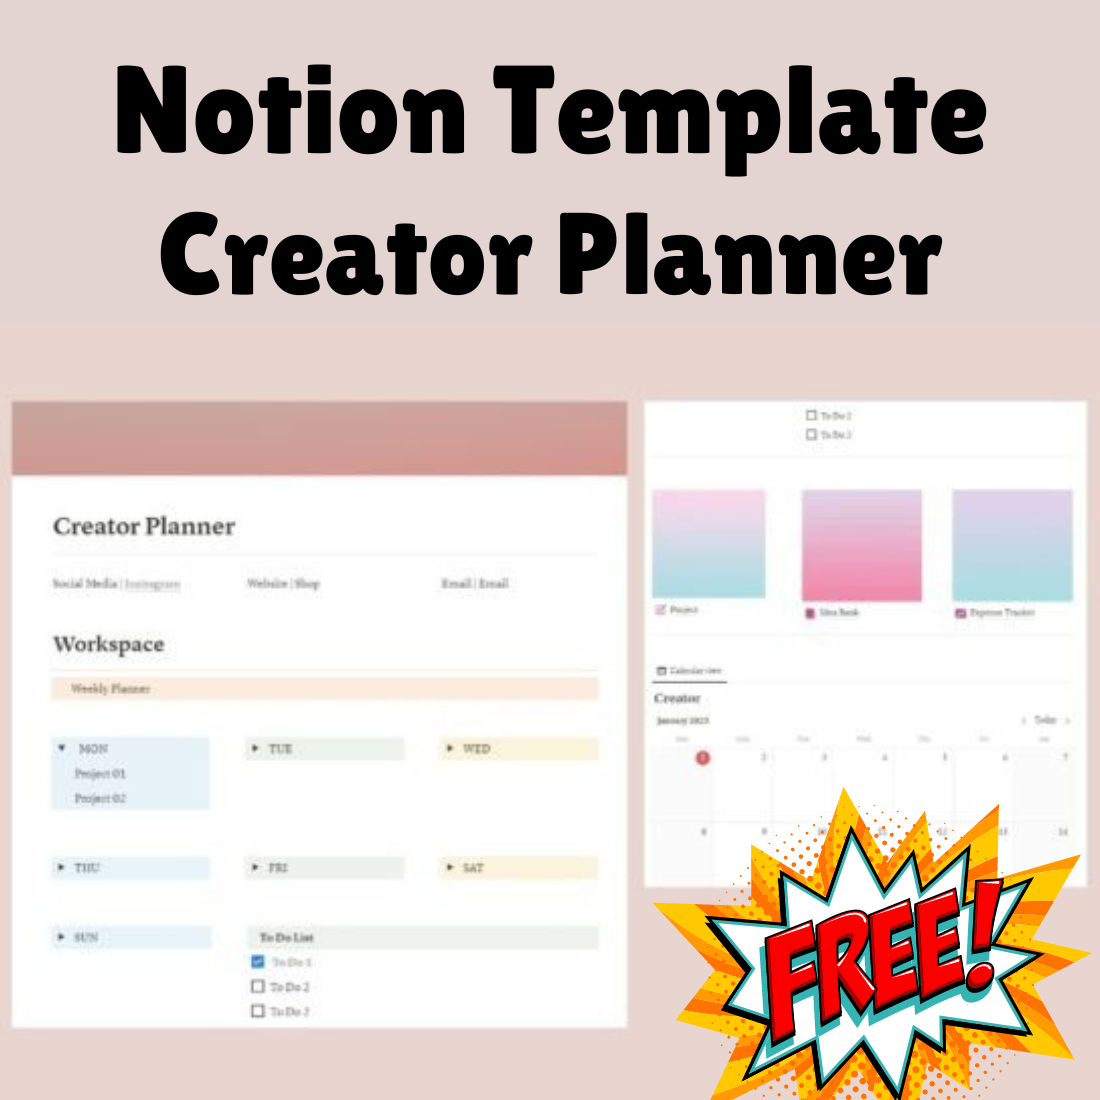 Creator Planner NOTION TEMPLATE preview image.